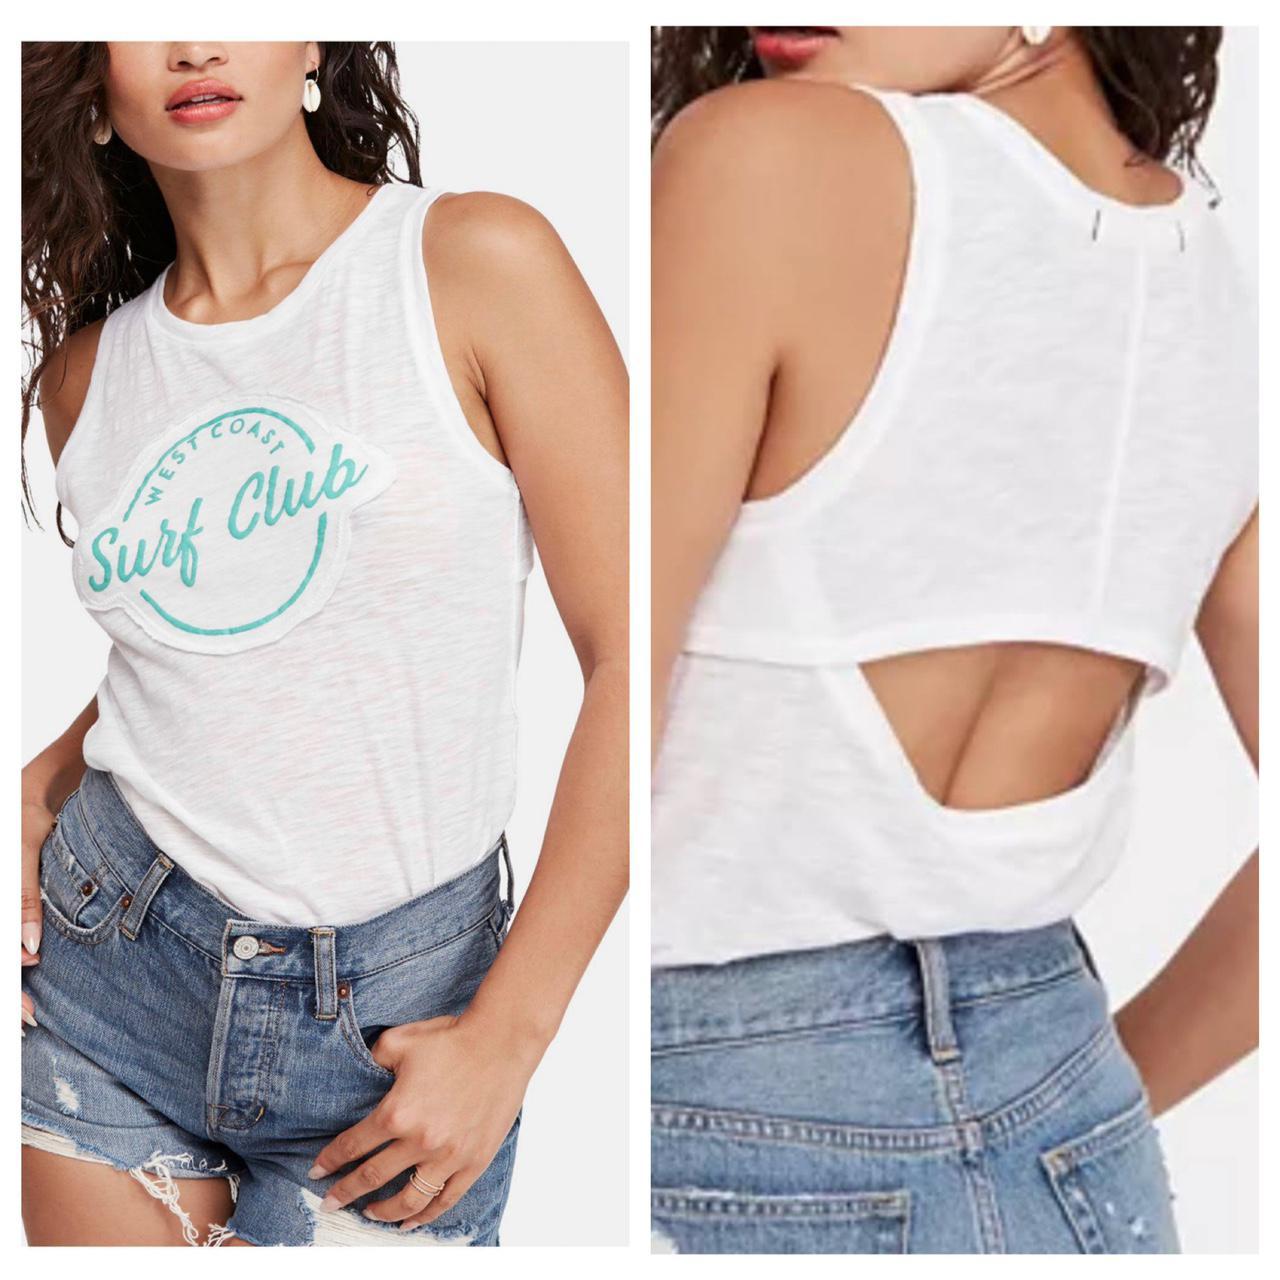 Free People Women's White and Blue Vests-tanks-camis